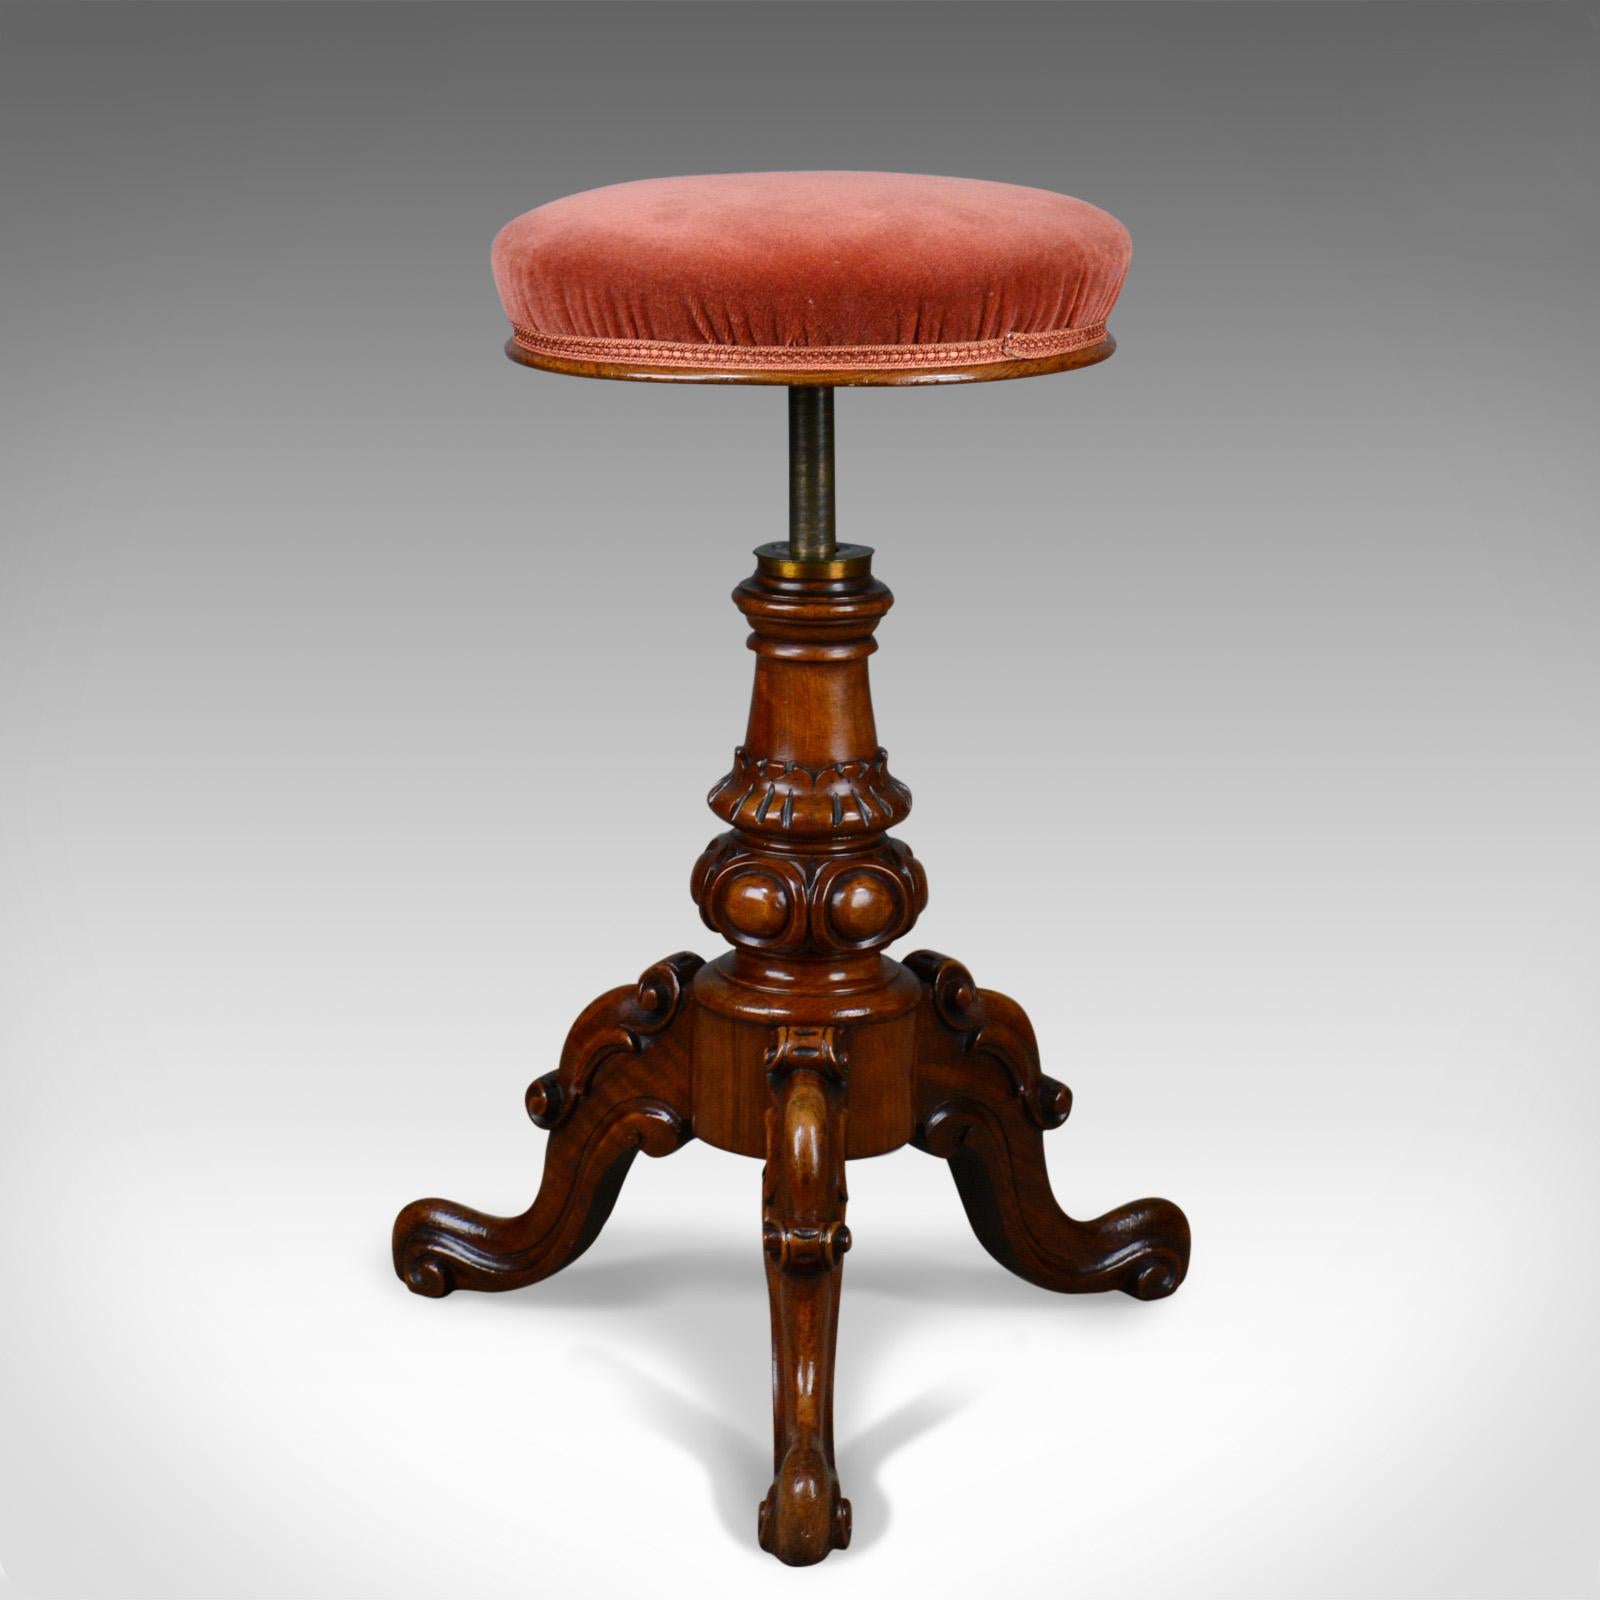 This is an antique piano stool in walnut. An adjustable, English, Victorian music seat dating to circa 1860.

Beautifully made in solid walnut with a waxed finish and desirable aged patina
Raised on a tripod of sturdy cabriole legs 
Inverted,